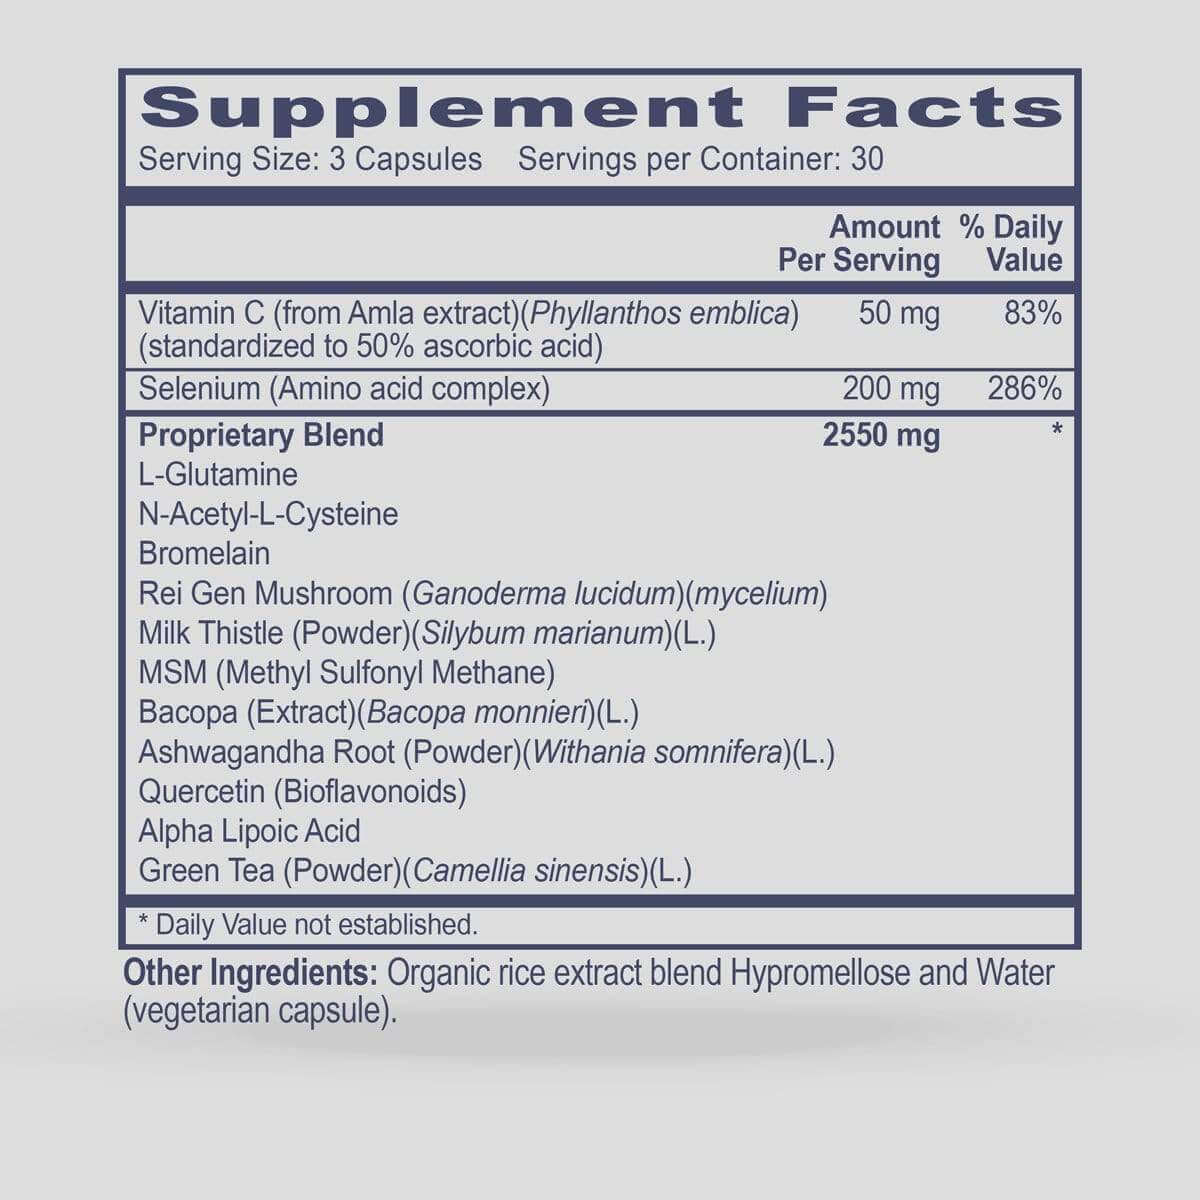 Glutathione Accelerator - 90 Caps Prof Health Products Supplement - Conners Clinic